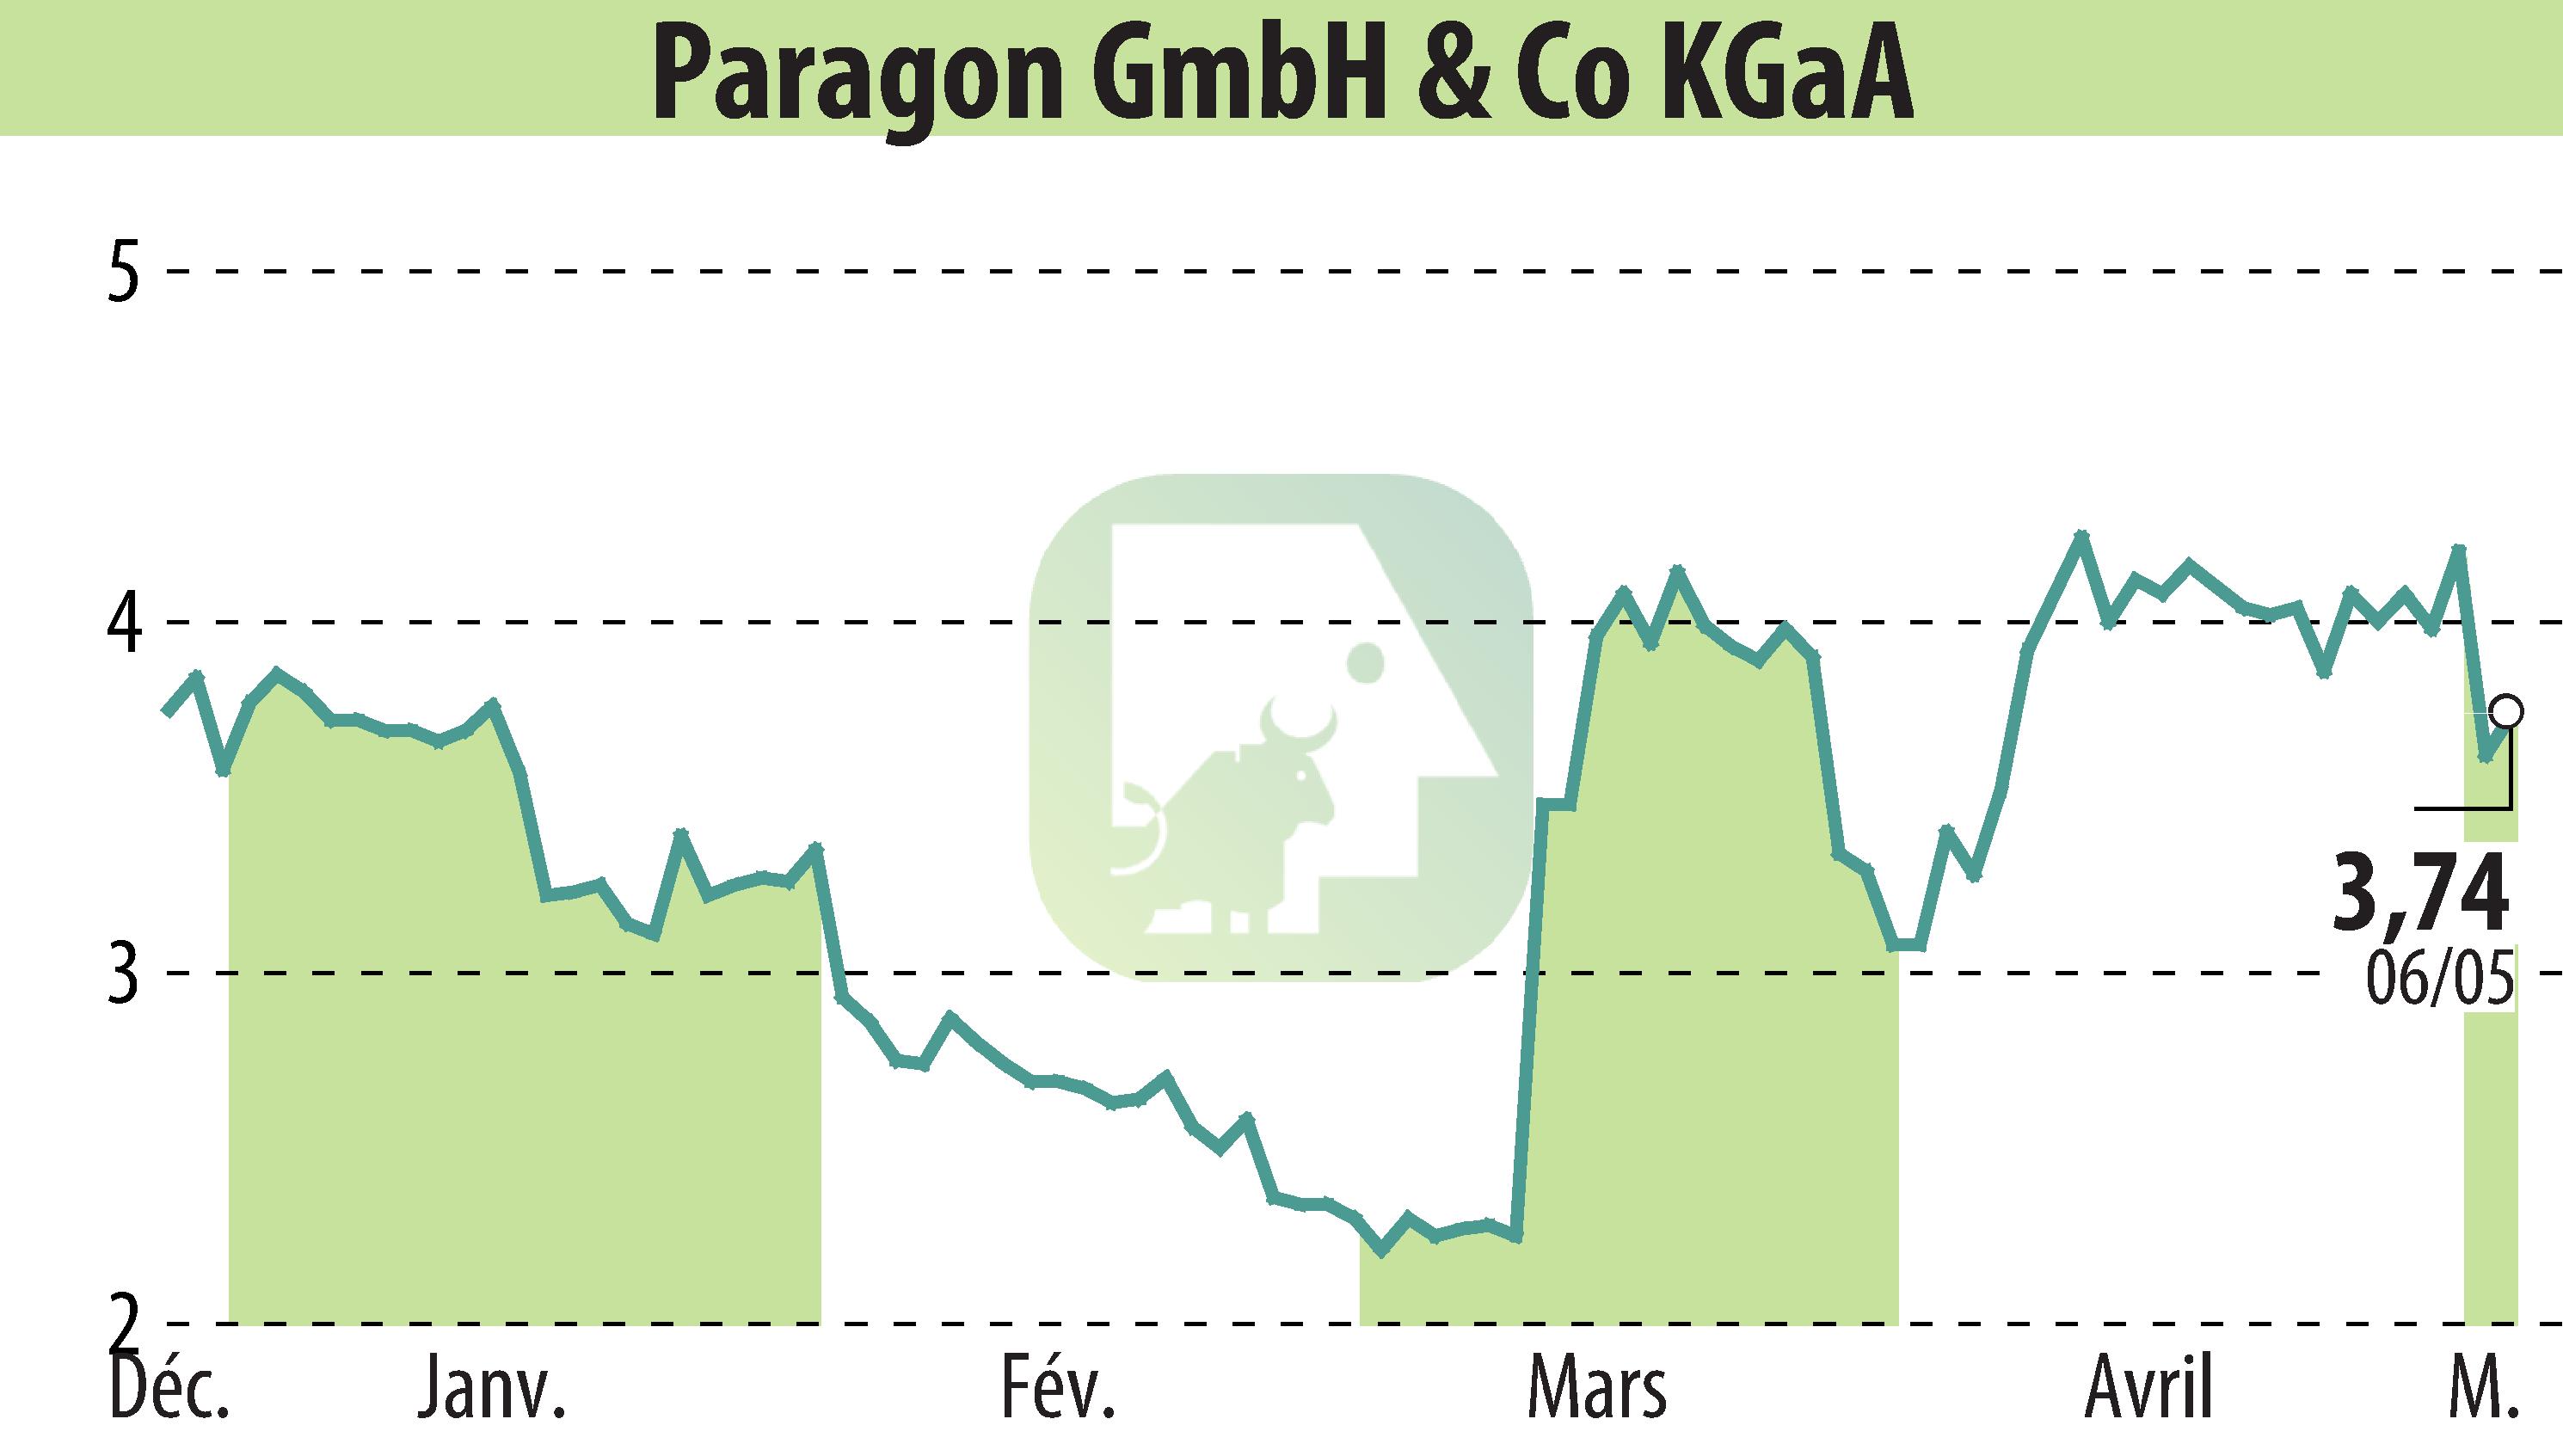 Stock price chart of Paragon AG (EBR:PGN) showing fluctuations.